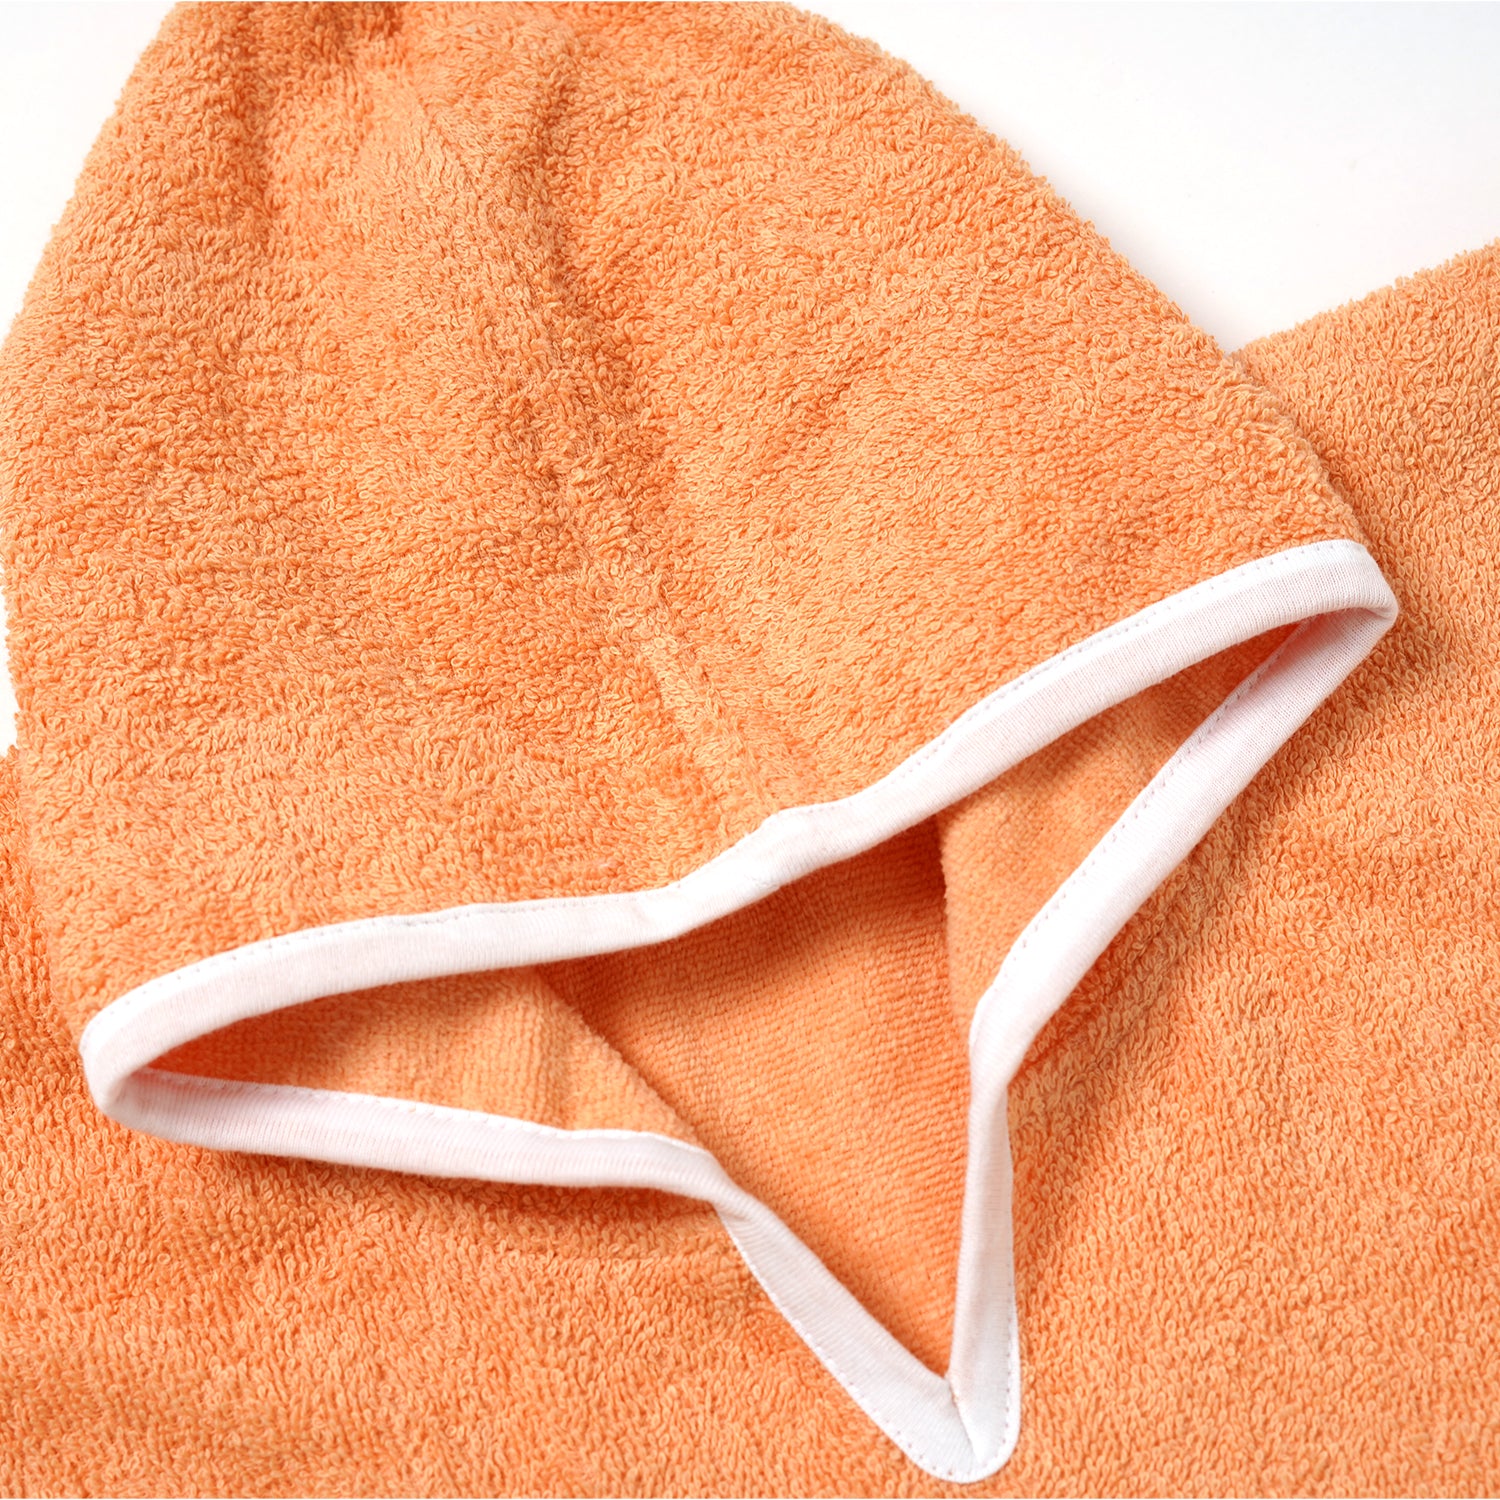 100% Cotton Woven Baby Poncho Towel Soft and Absorbent Hooded Towel (Orange)